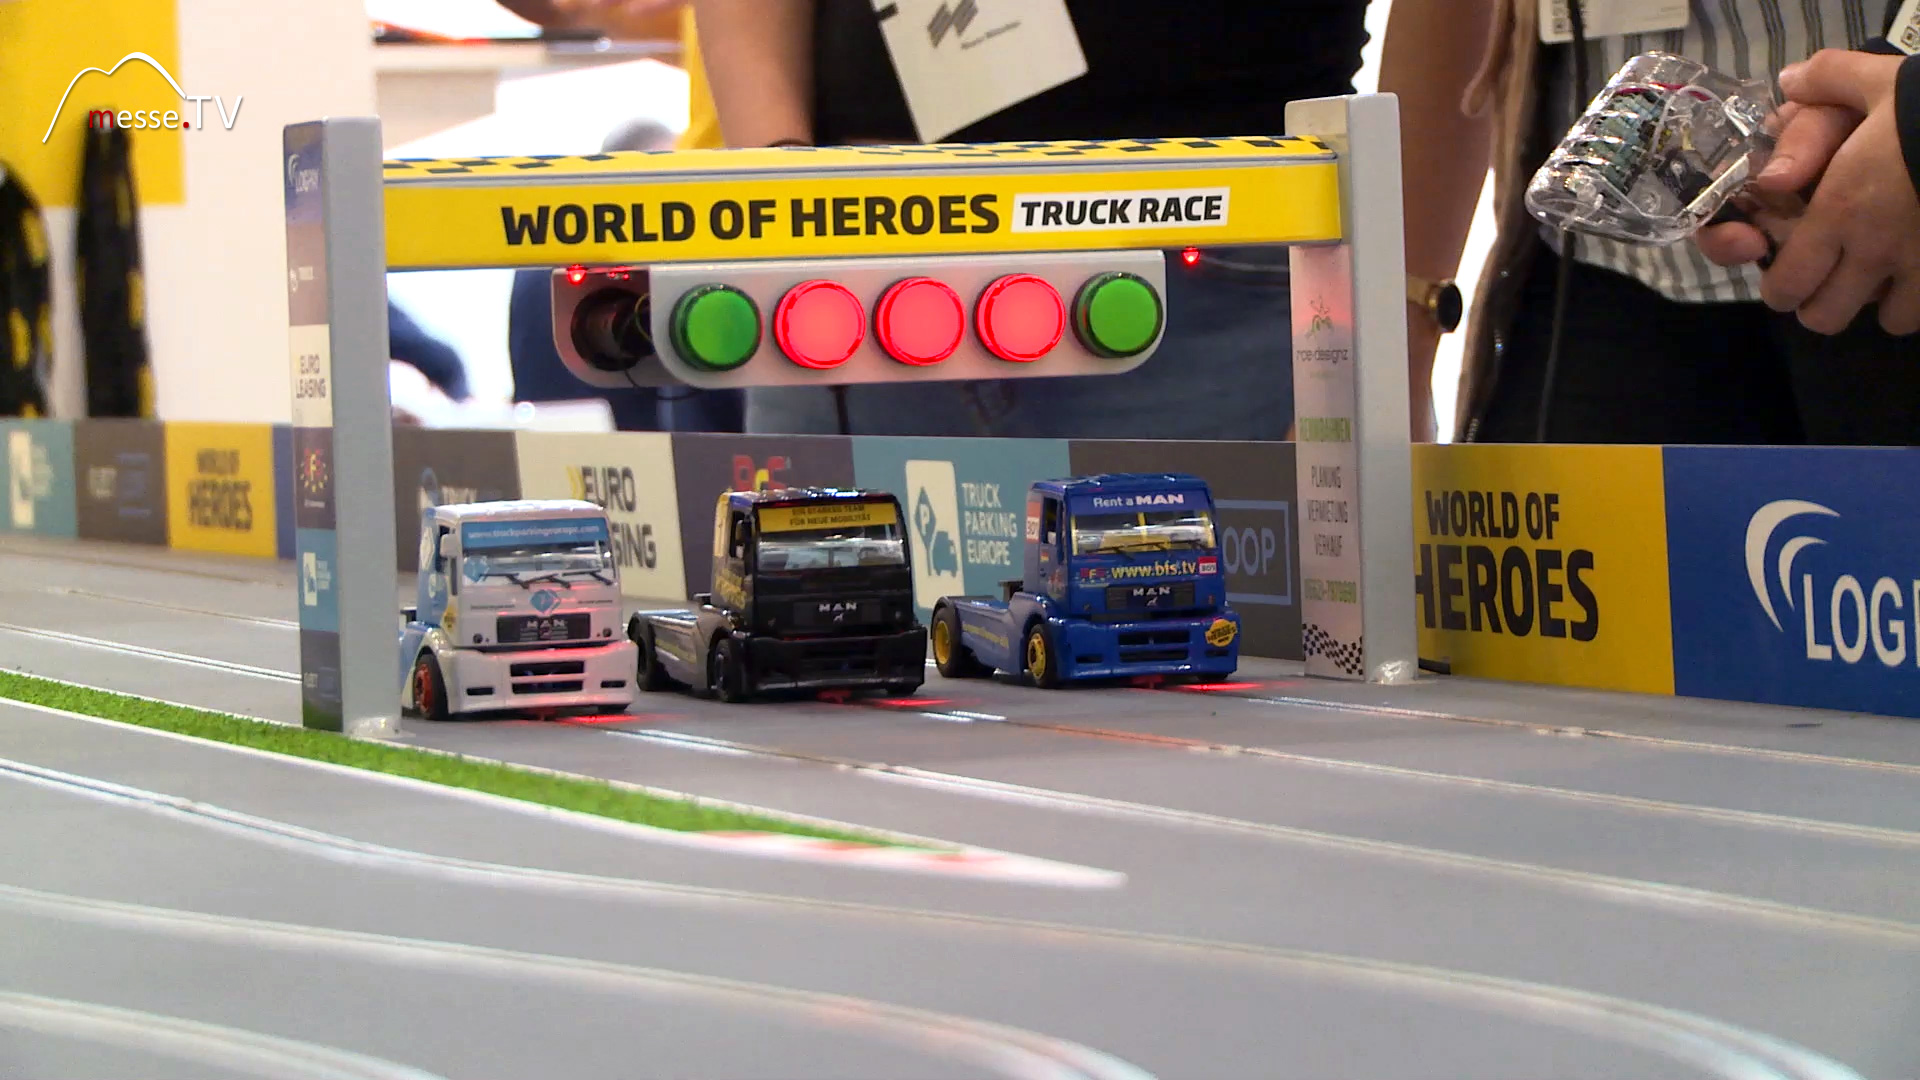 World of Heroes Truck Race transport logistic 2019